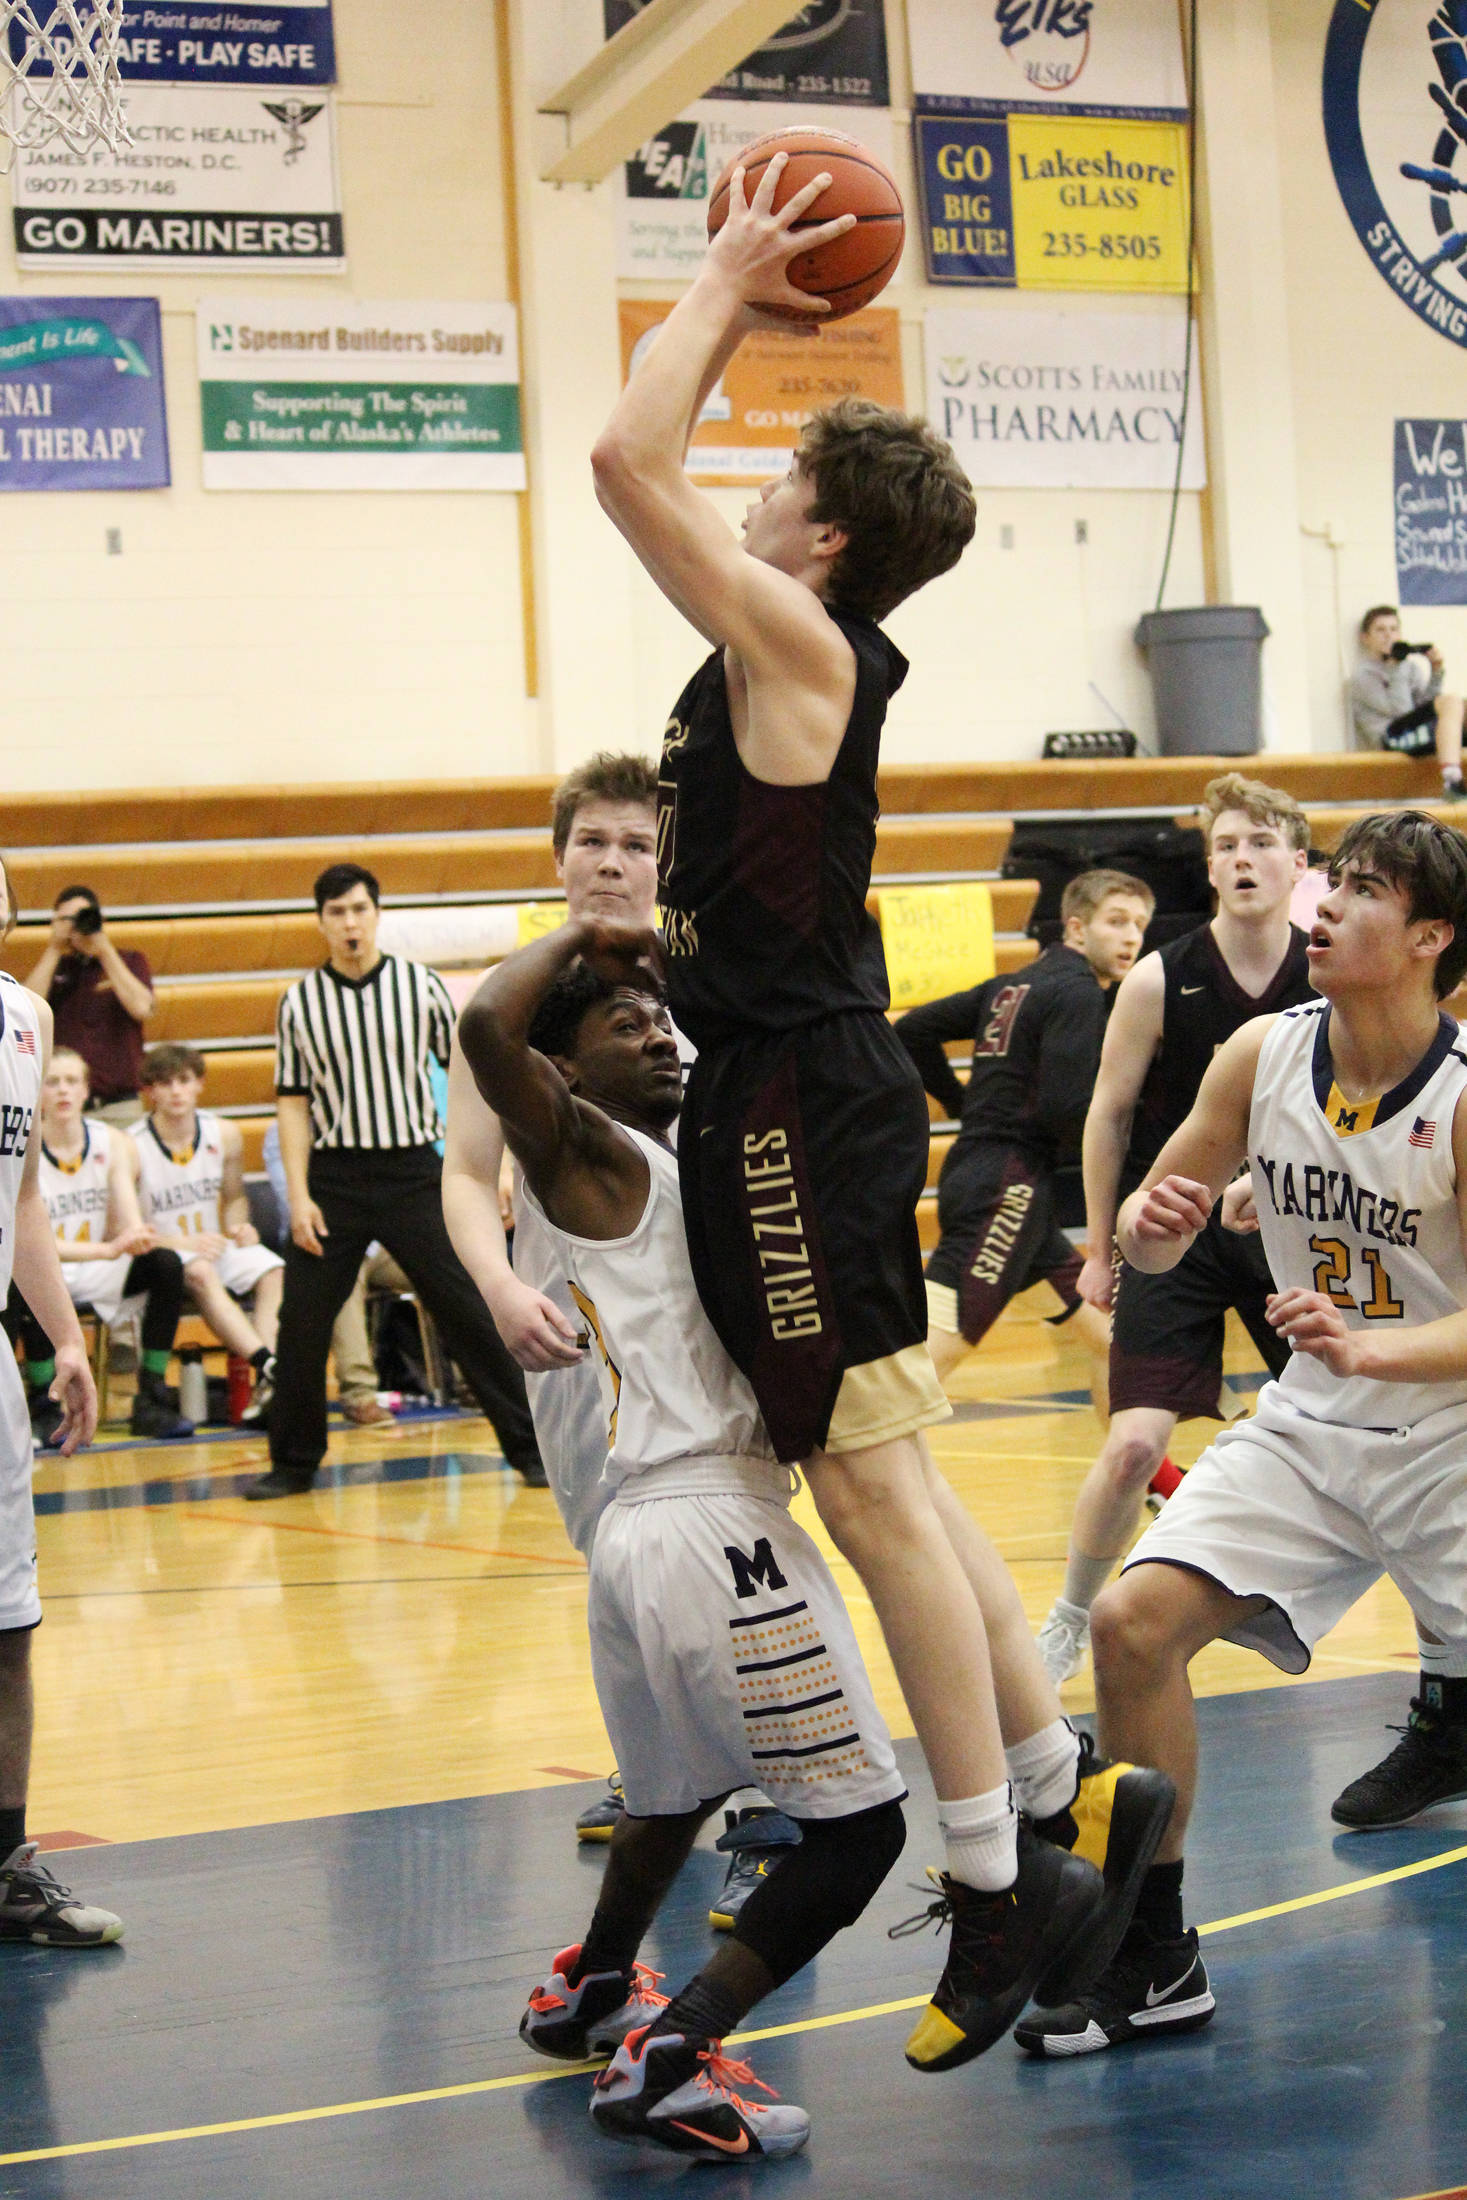 Nathan Ivanoff of Grace Christian School takes a shot at the Homer basket during a Friday, Feb. 22, 2019 game in Homer, Alaska. (Photo by Megan Pacer/Homer News)